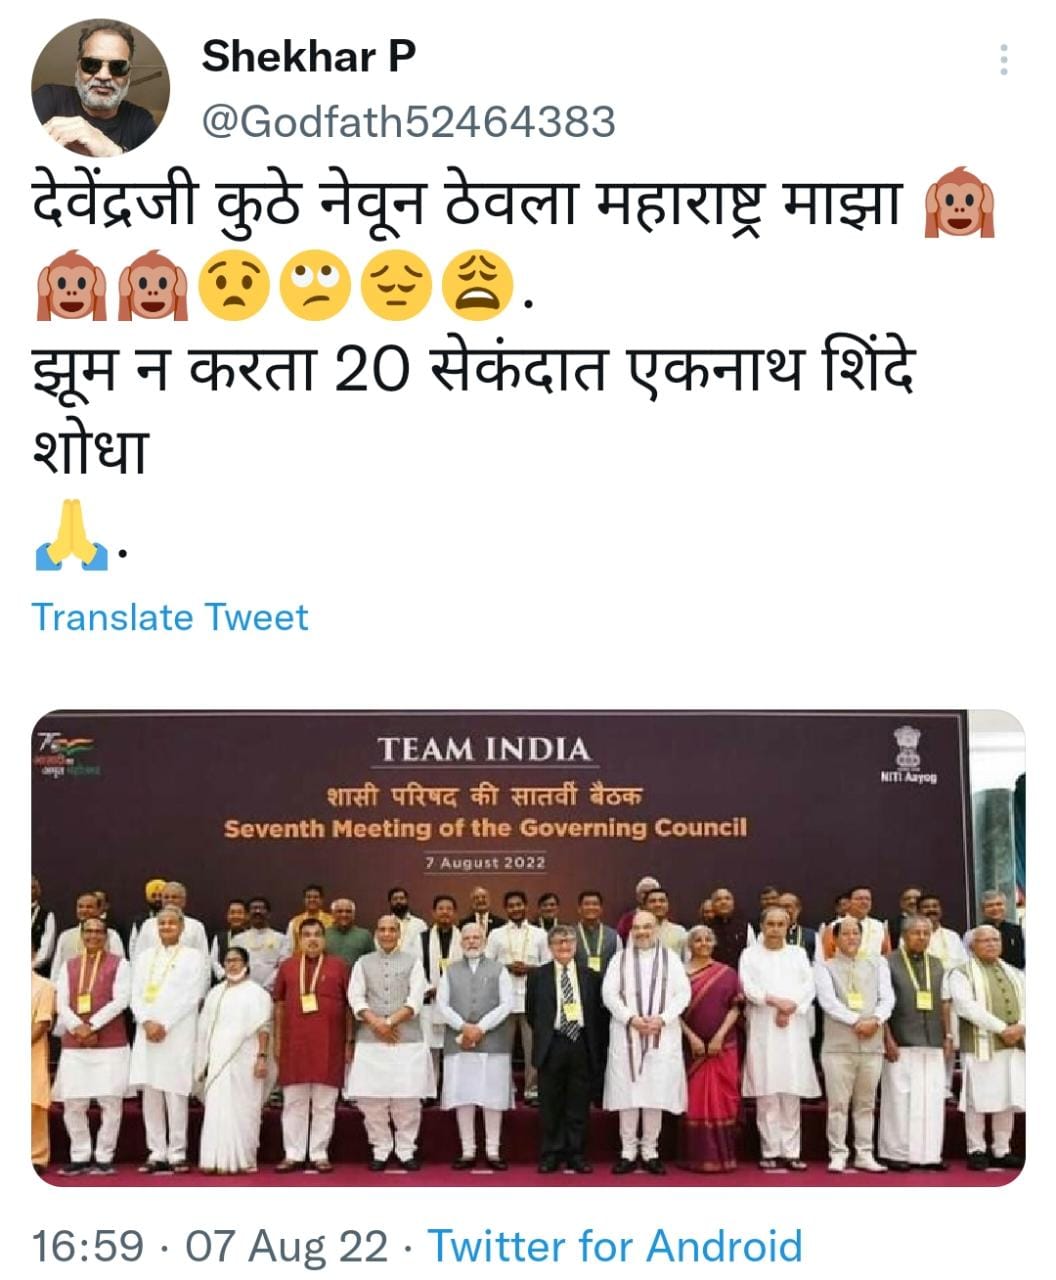 Viral Posts Eknath Shinde Stand in last row during photo of Niti Aayog meet